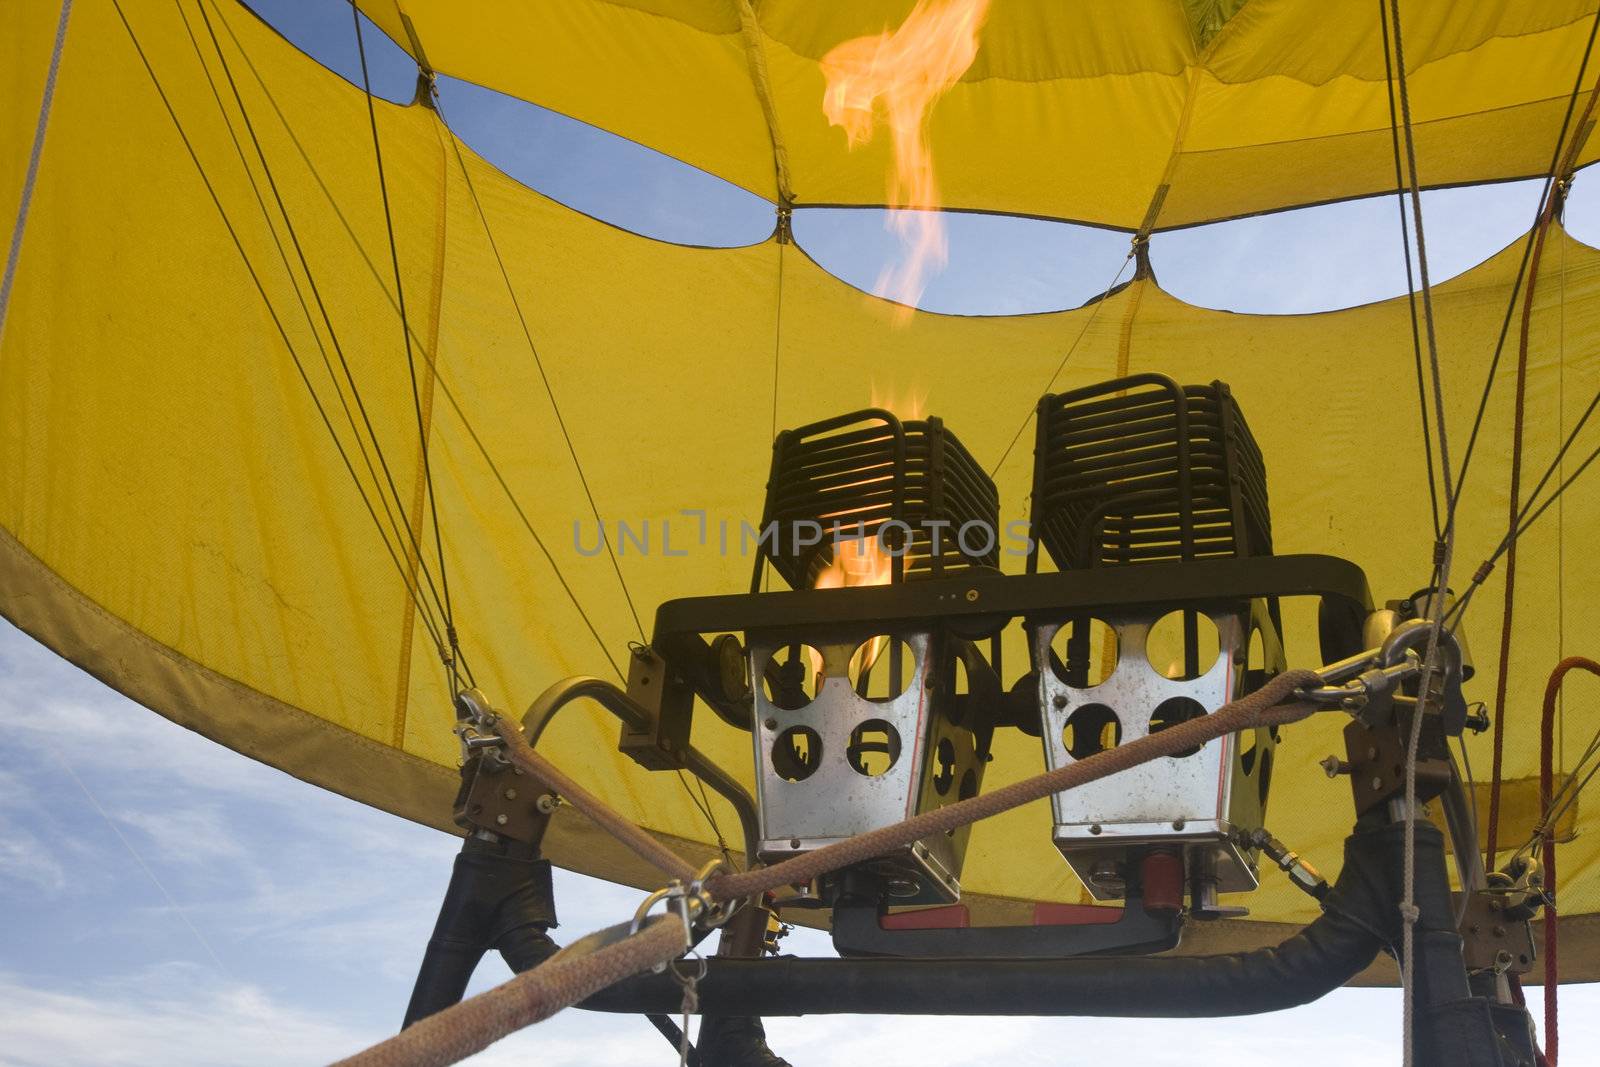 propane gas burners of hot air balloon by PixelsAway